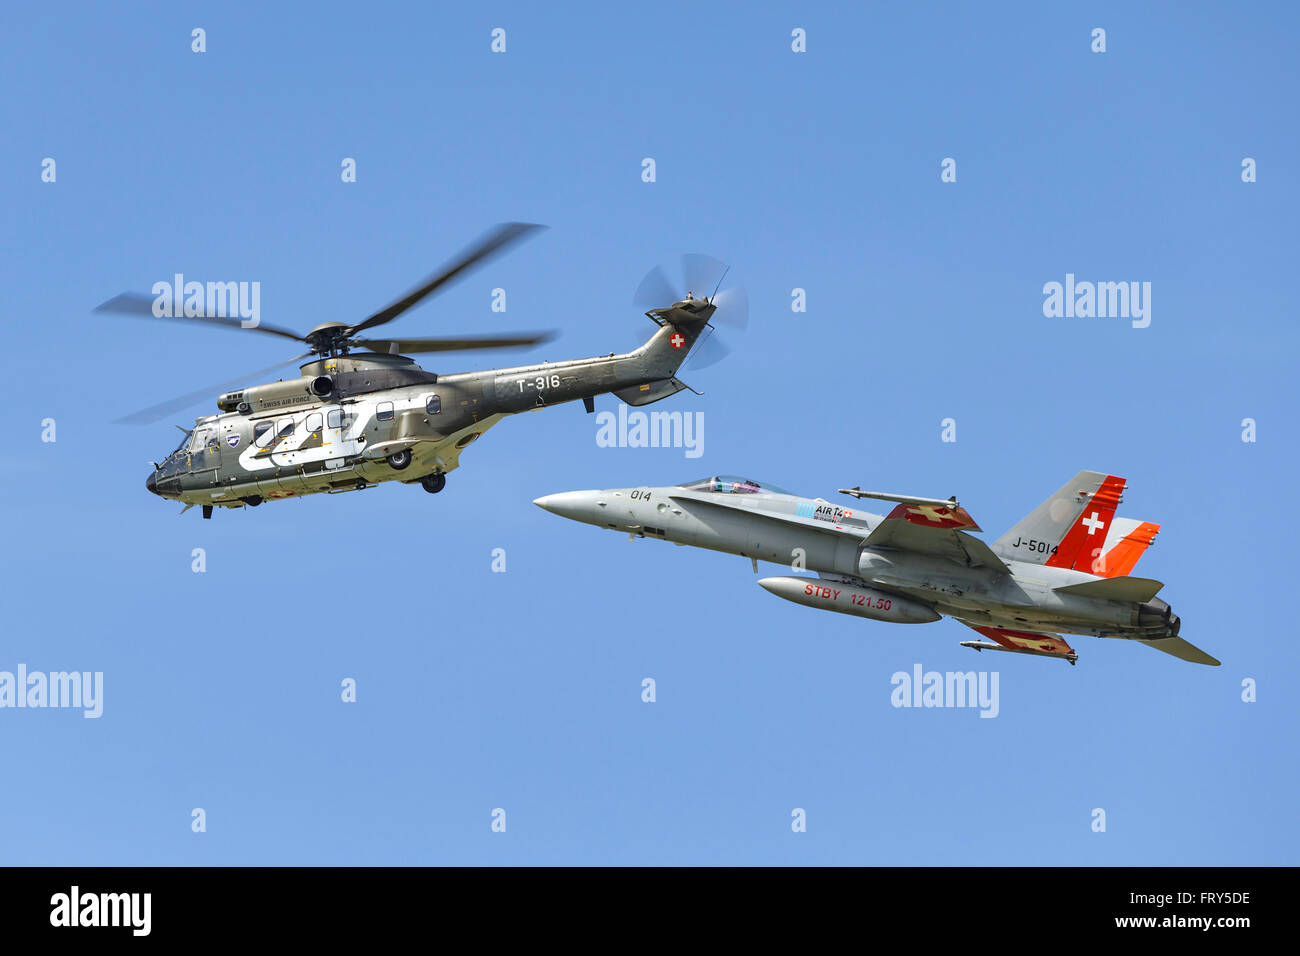 Aerospatiale Super Puma Military helicopter T-316 from the Swiss Air Force flies in formation with an F/A-18C Hornet fighter Stock Photo